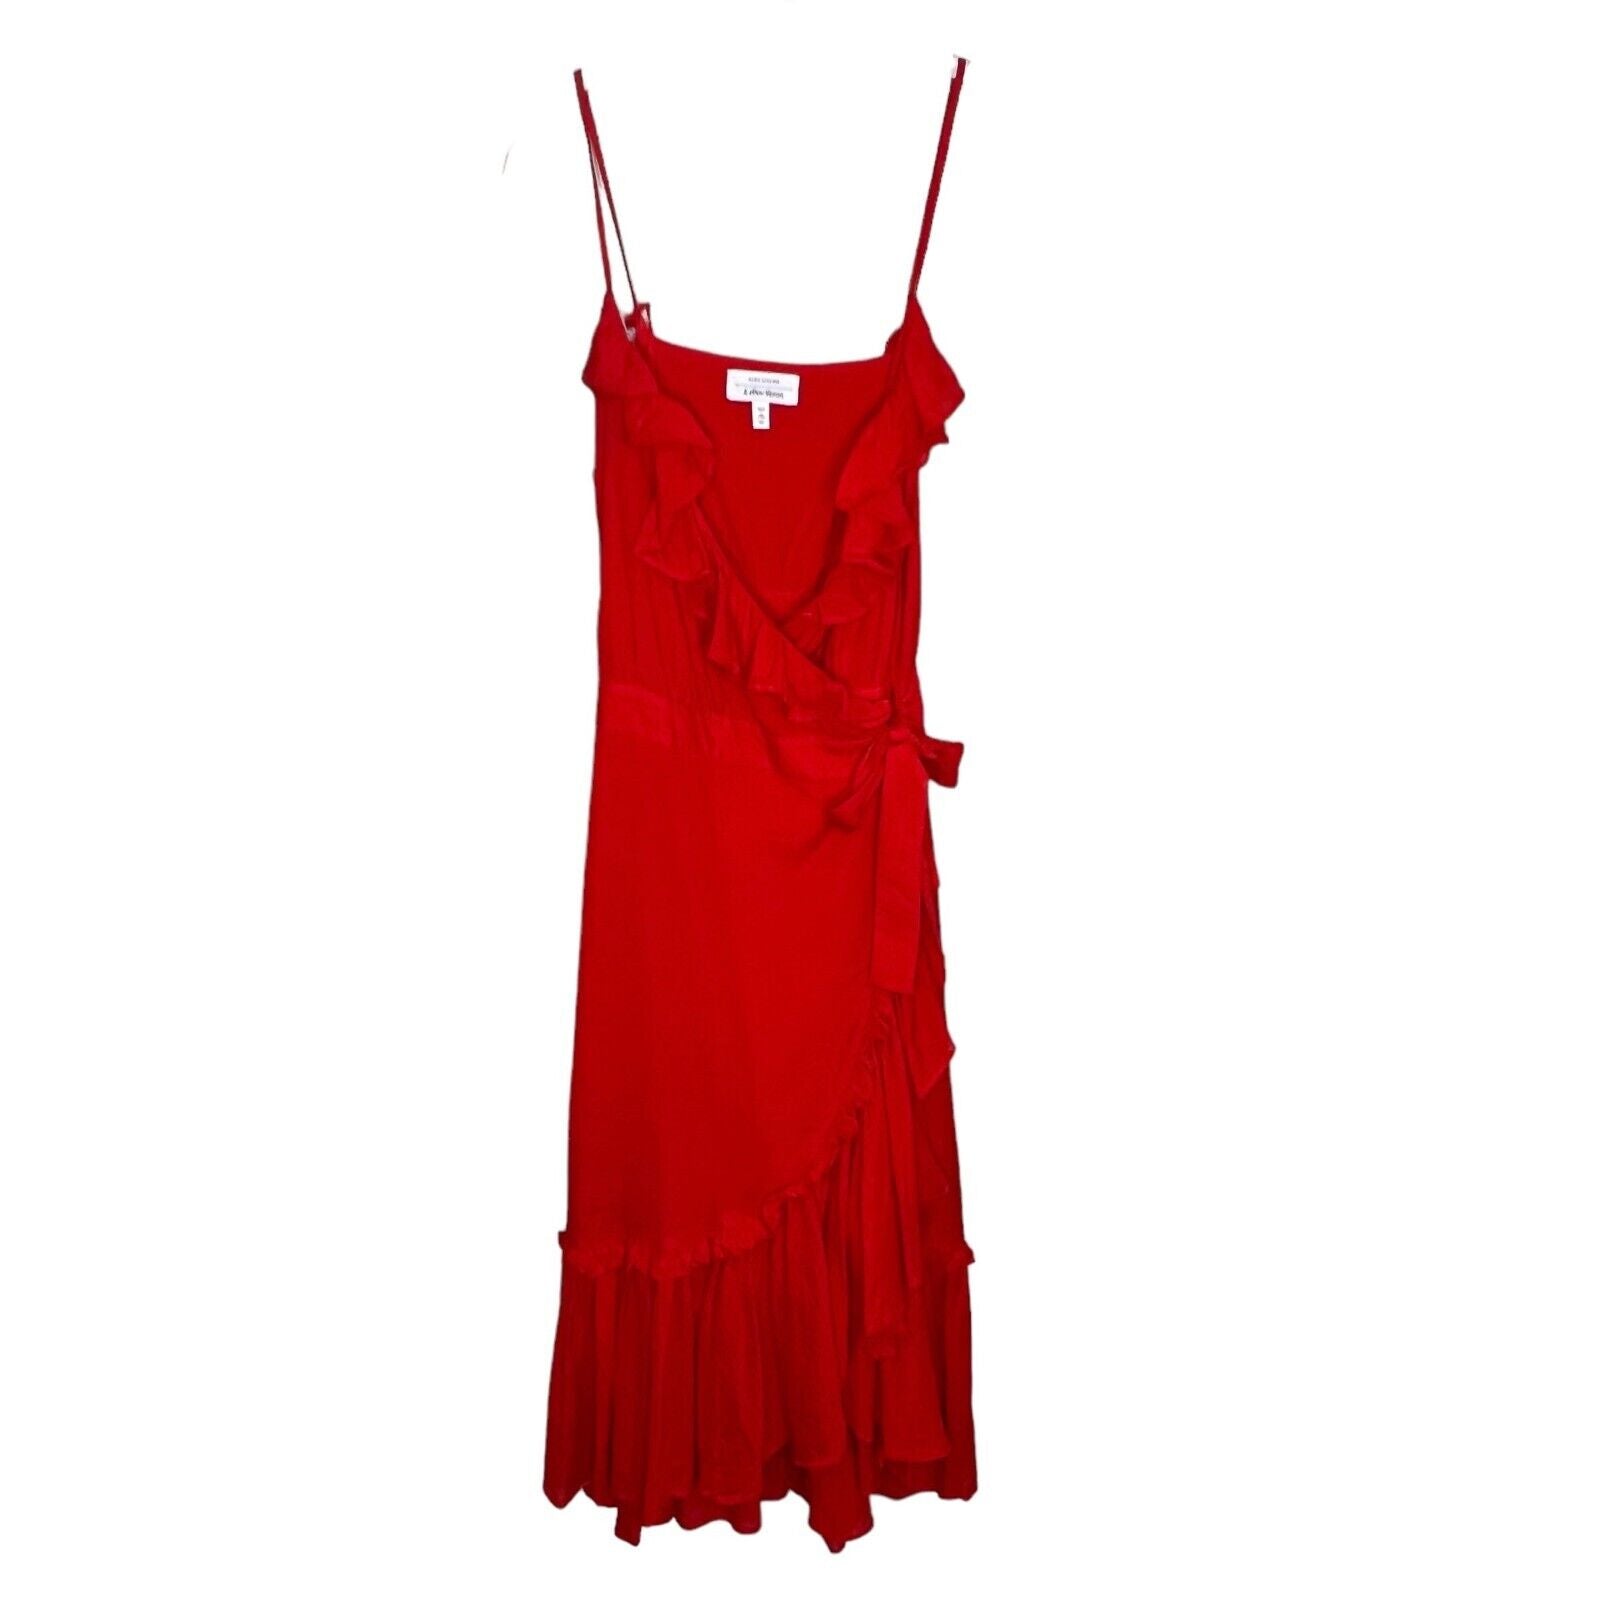 & Other Stories Red Ruffle Wrap Dress Size Size 8